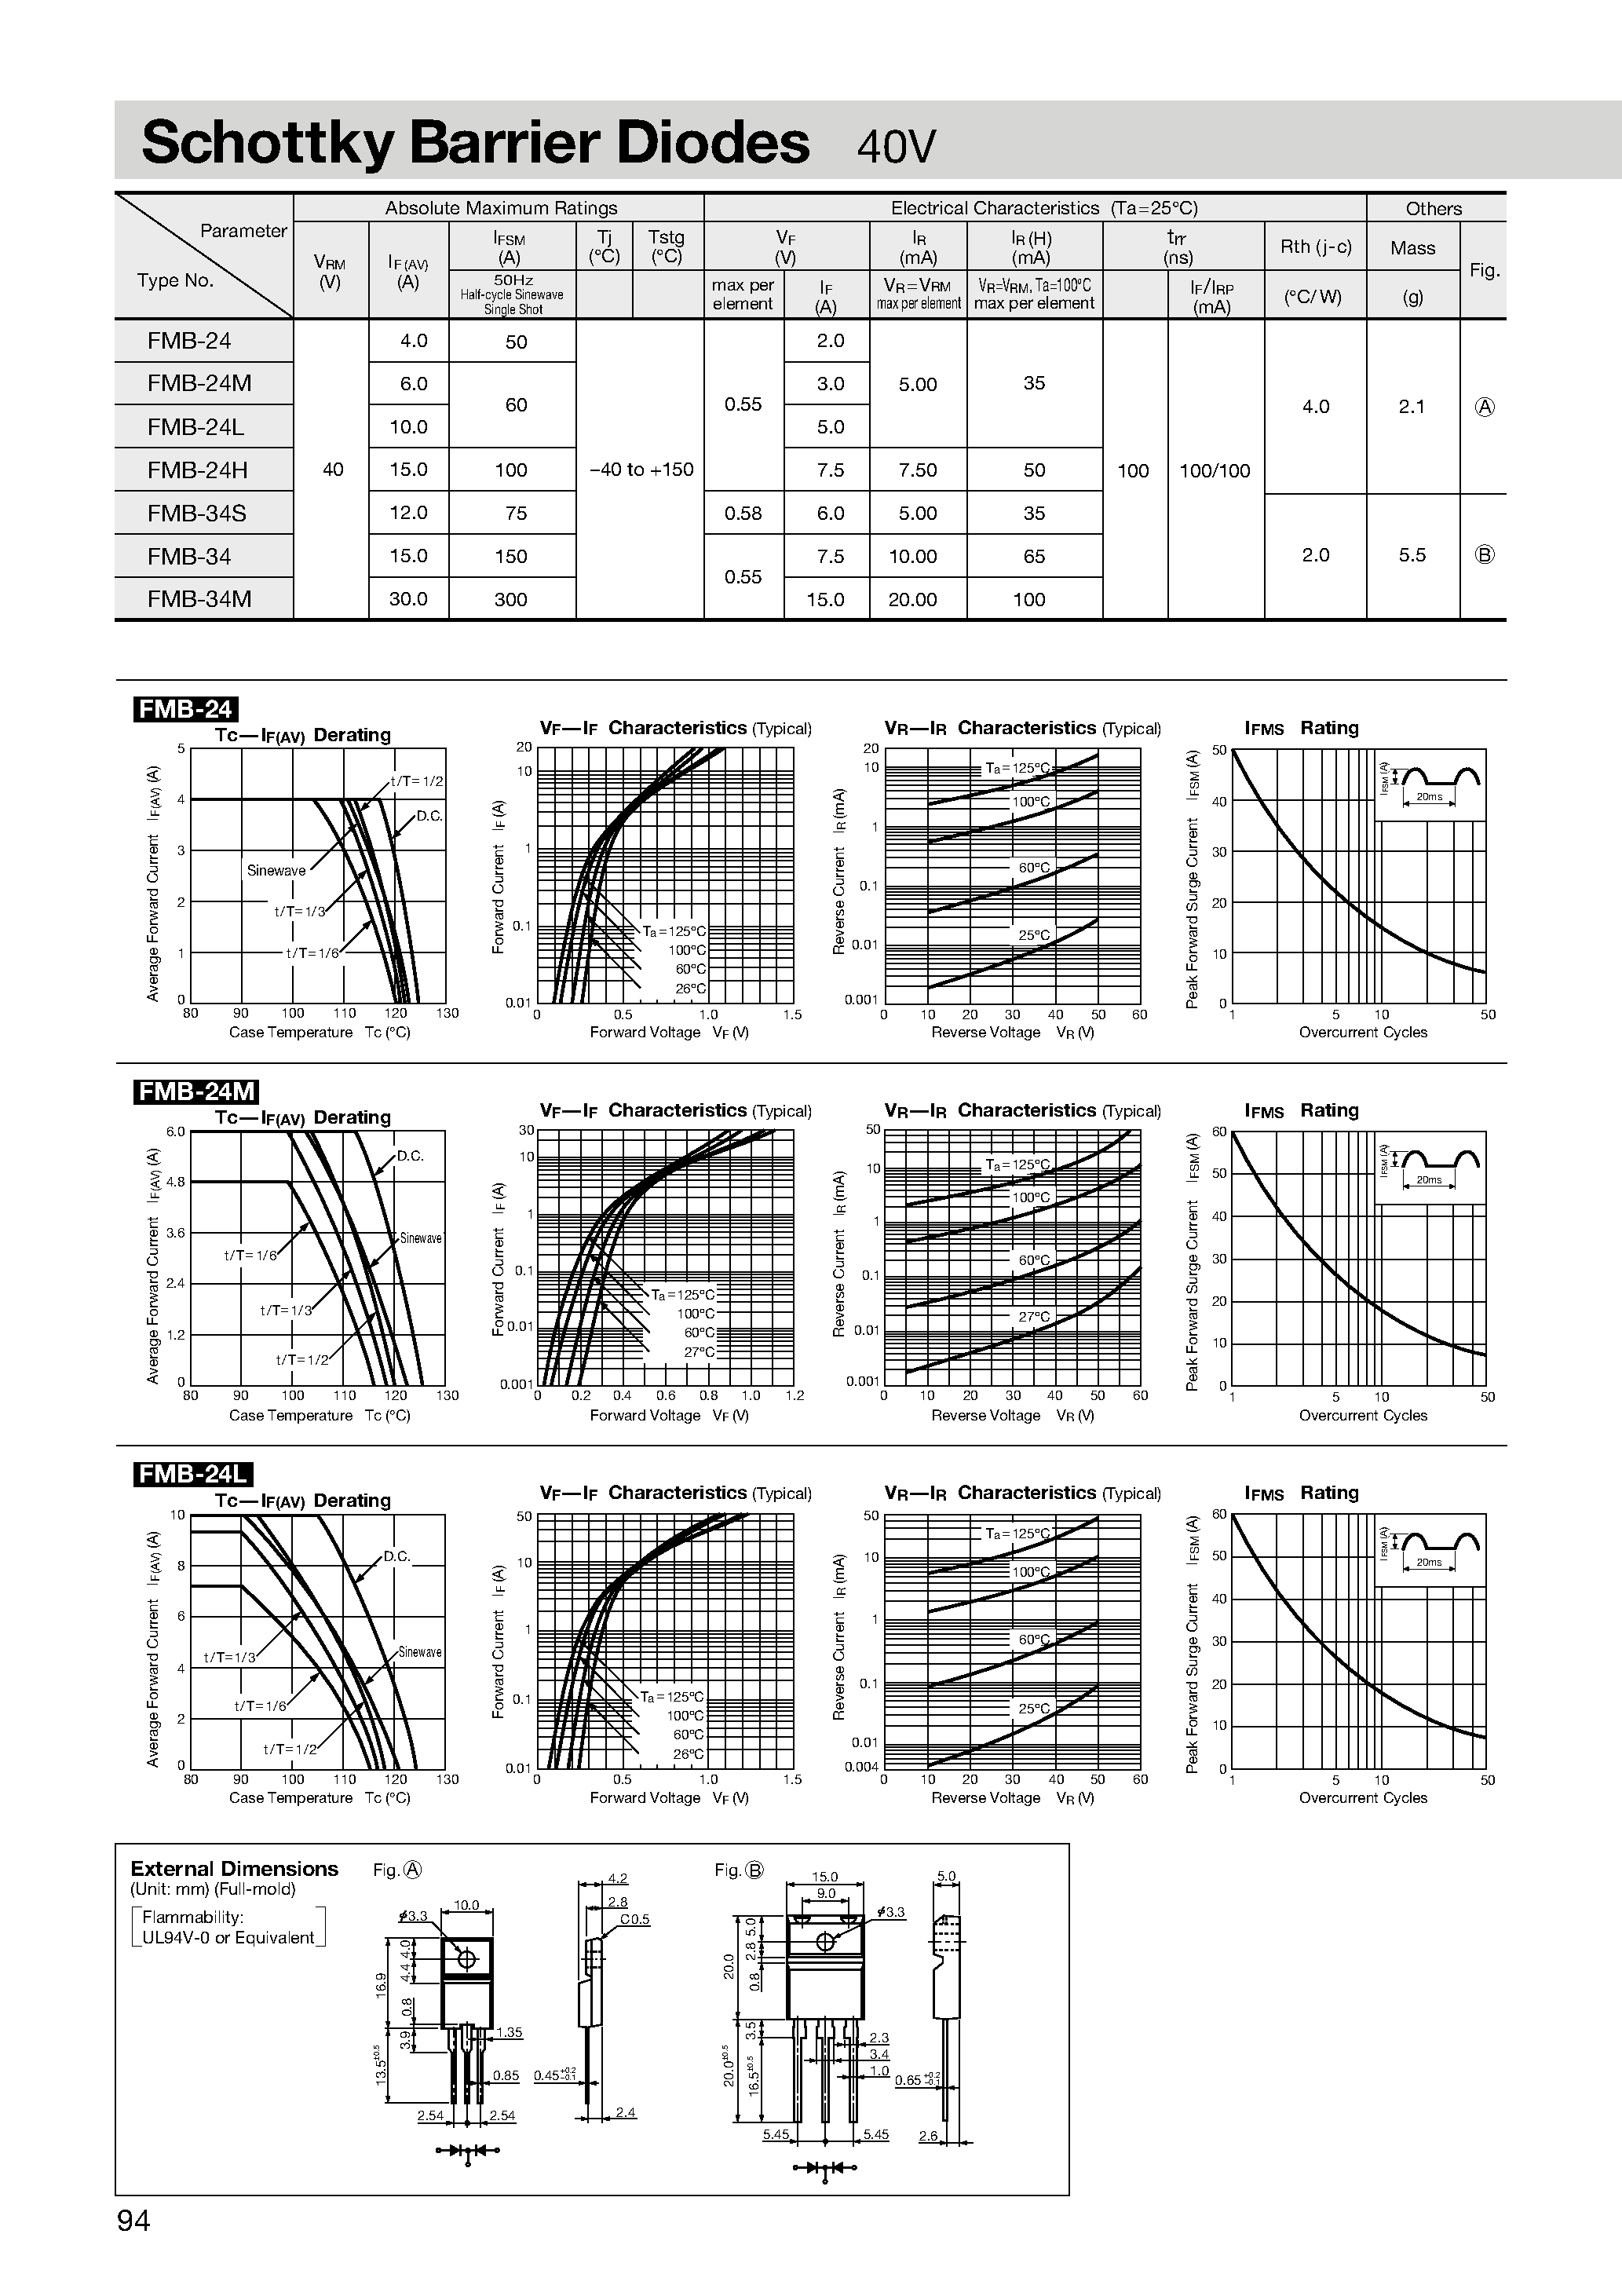 Datasheet FMB-24L - Schottky Barrier Diodes 40V page 1